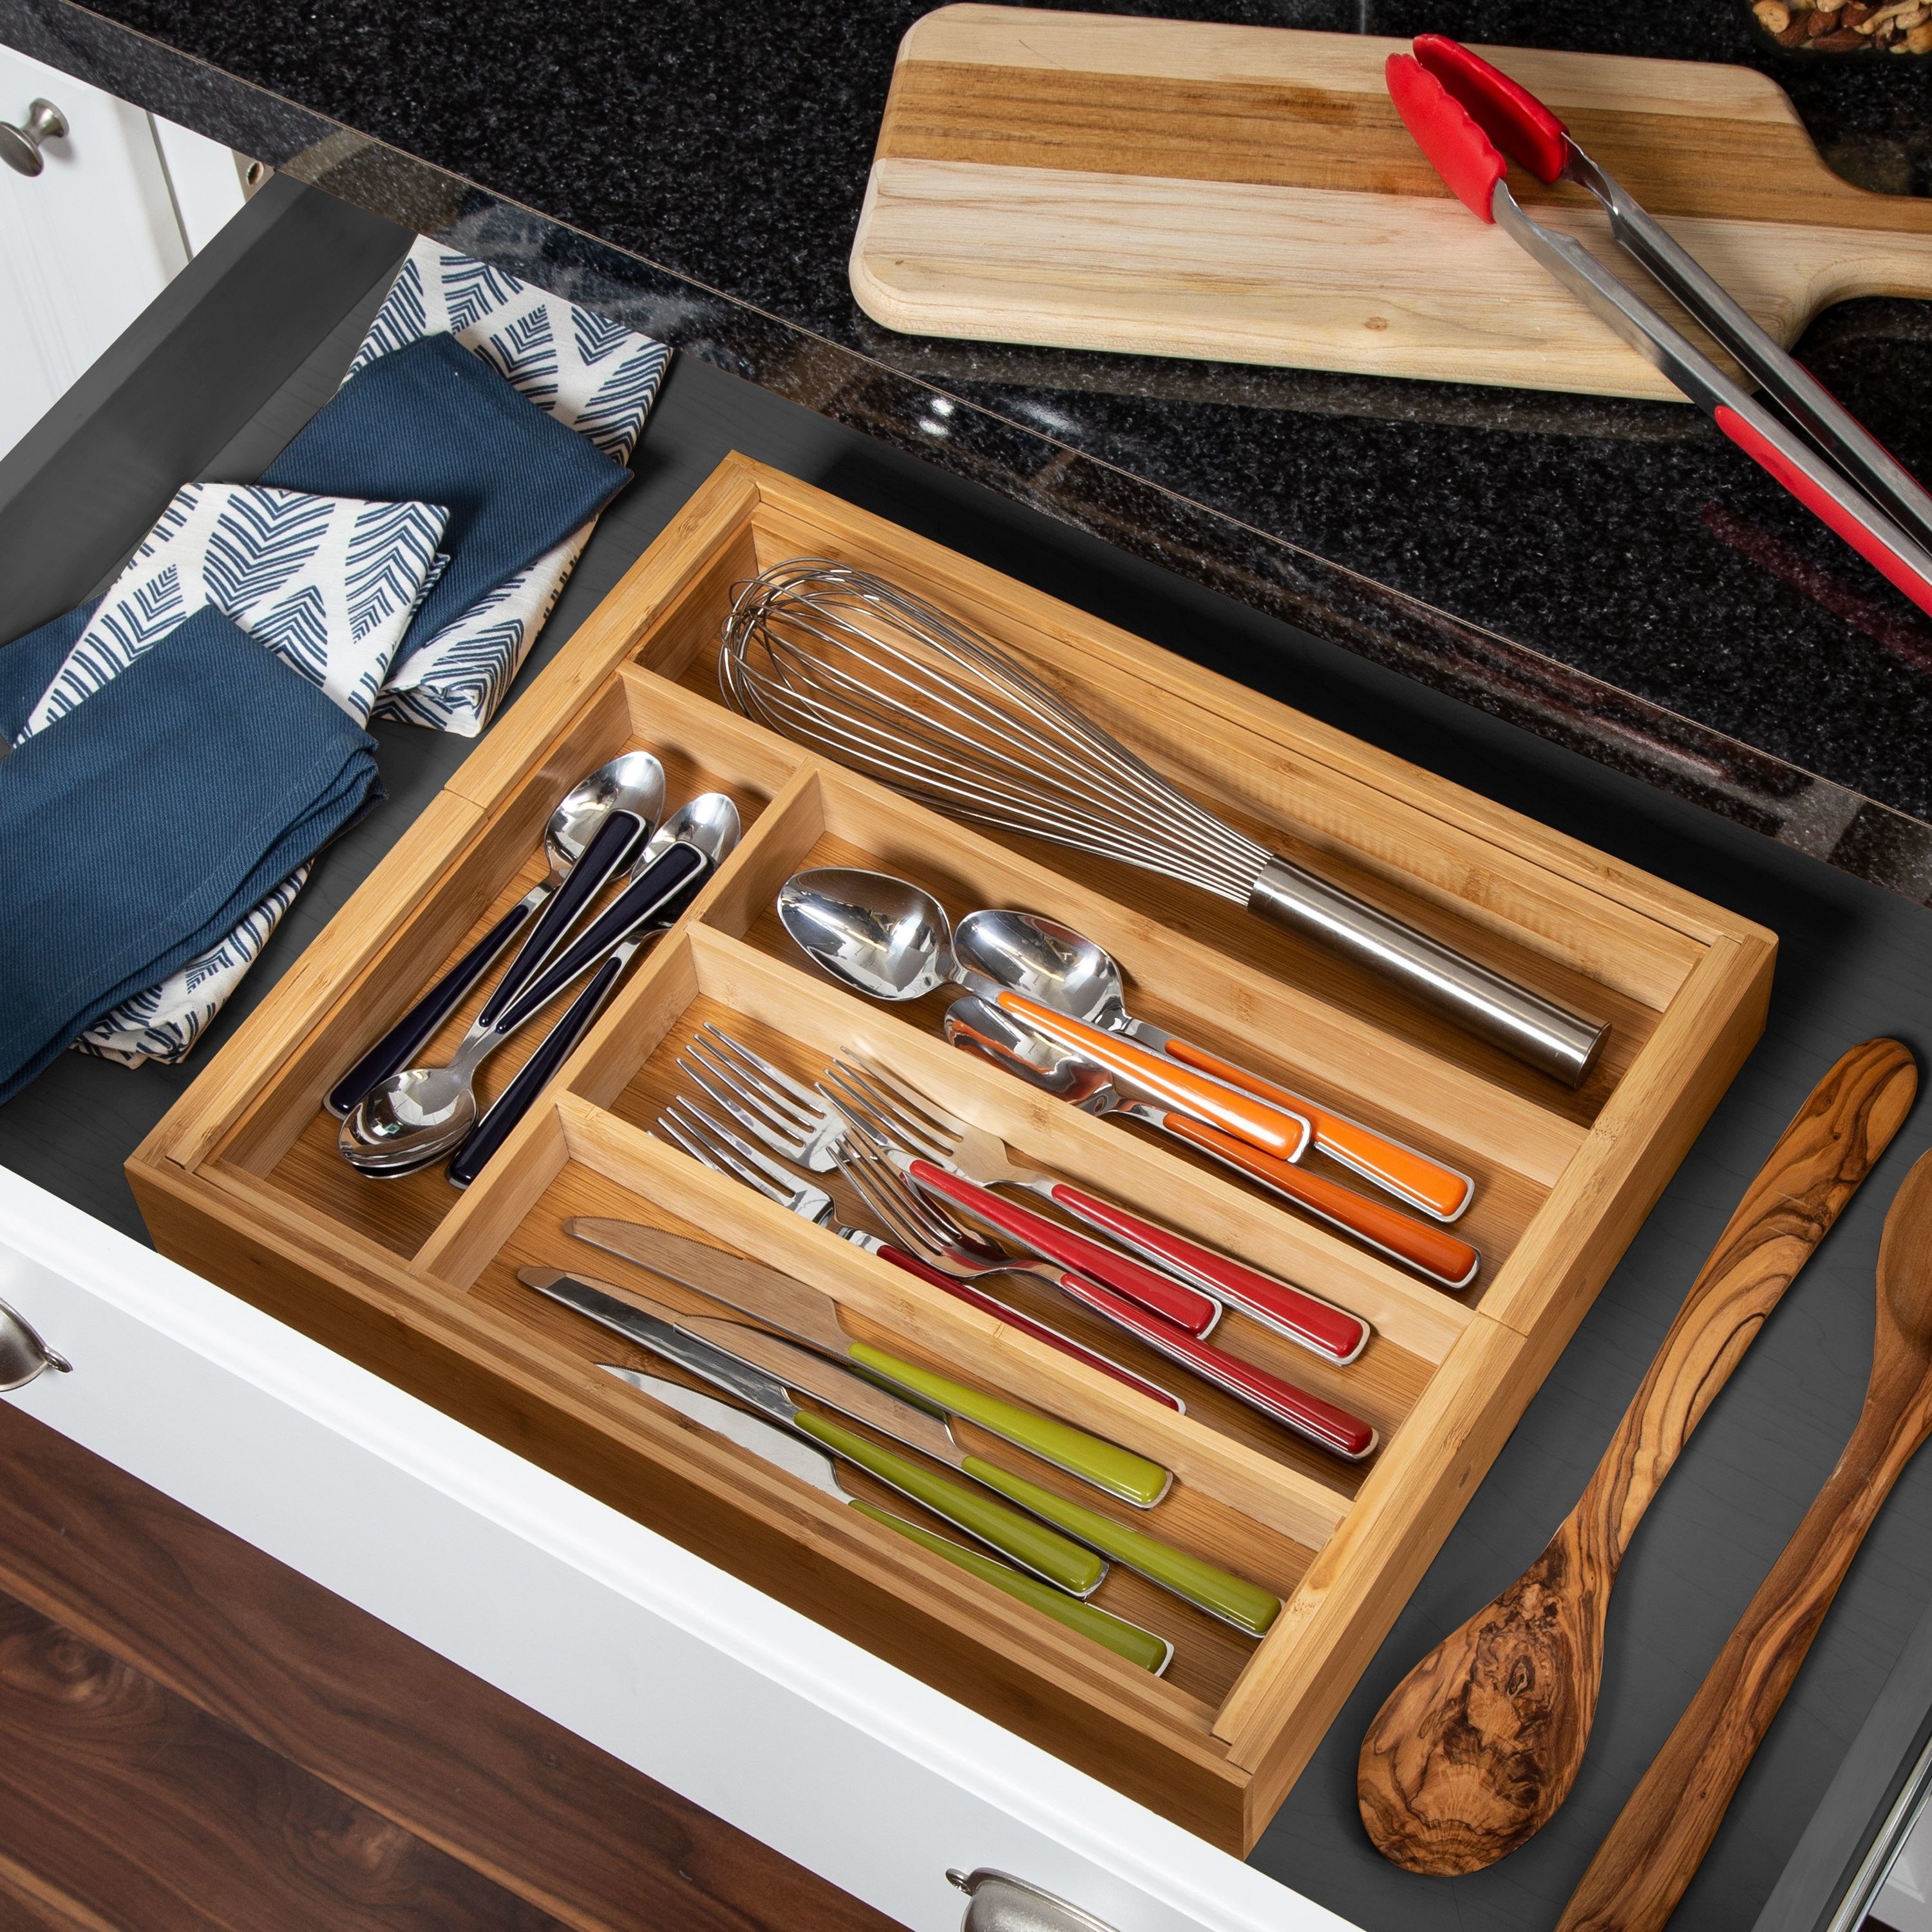 The organizer full of cutlery in a drawer